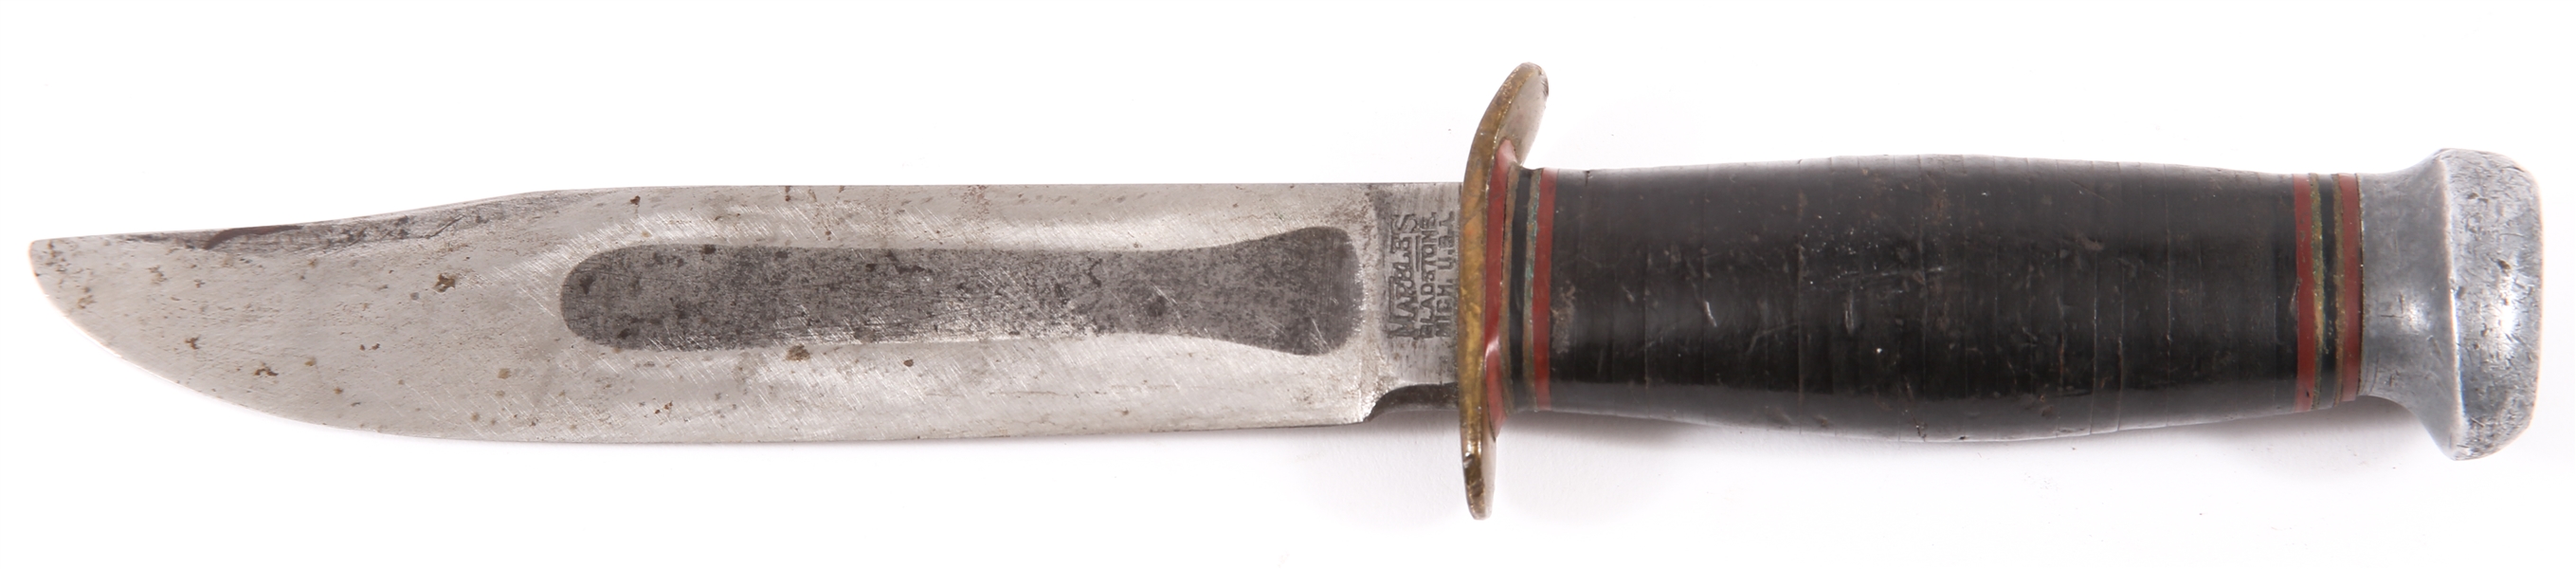 EARLY 20TH CENTURY MARBLES FIGHTING KNIFE